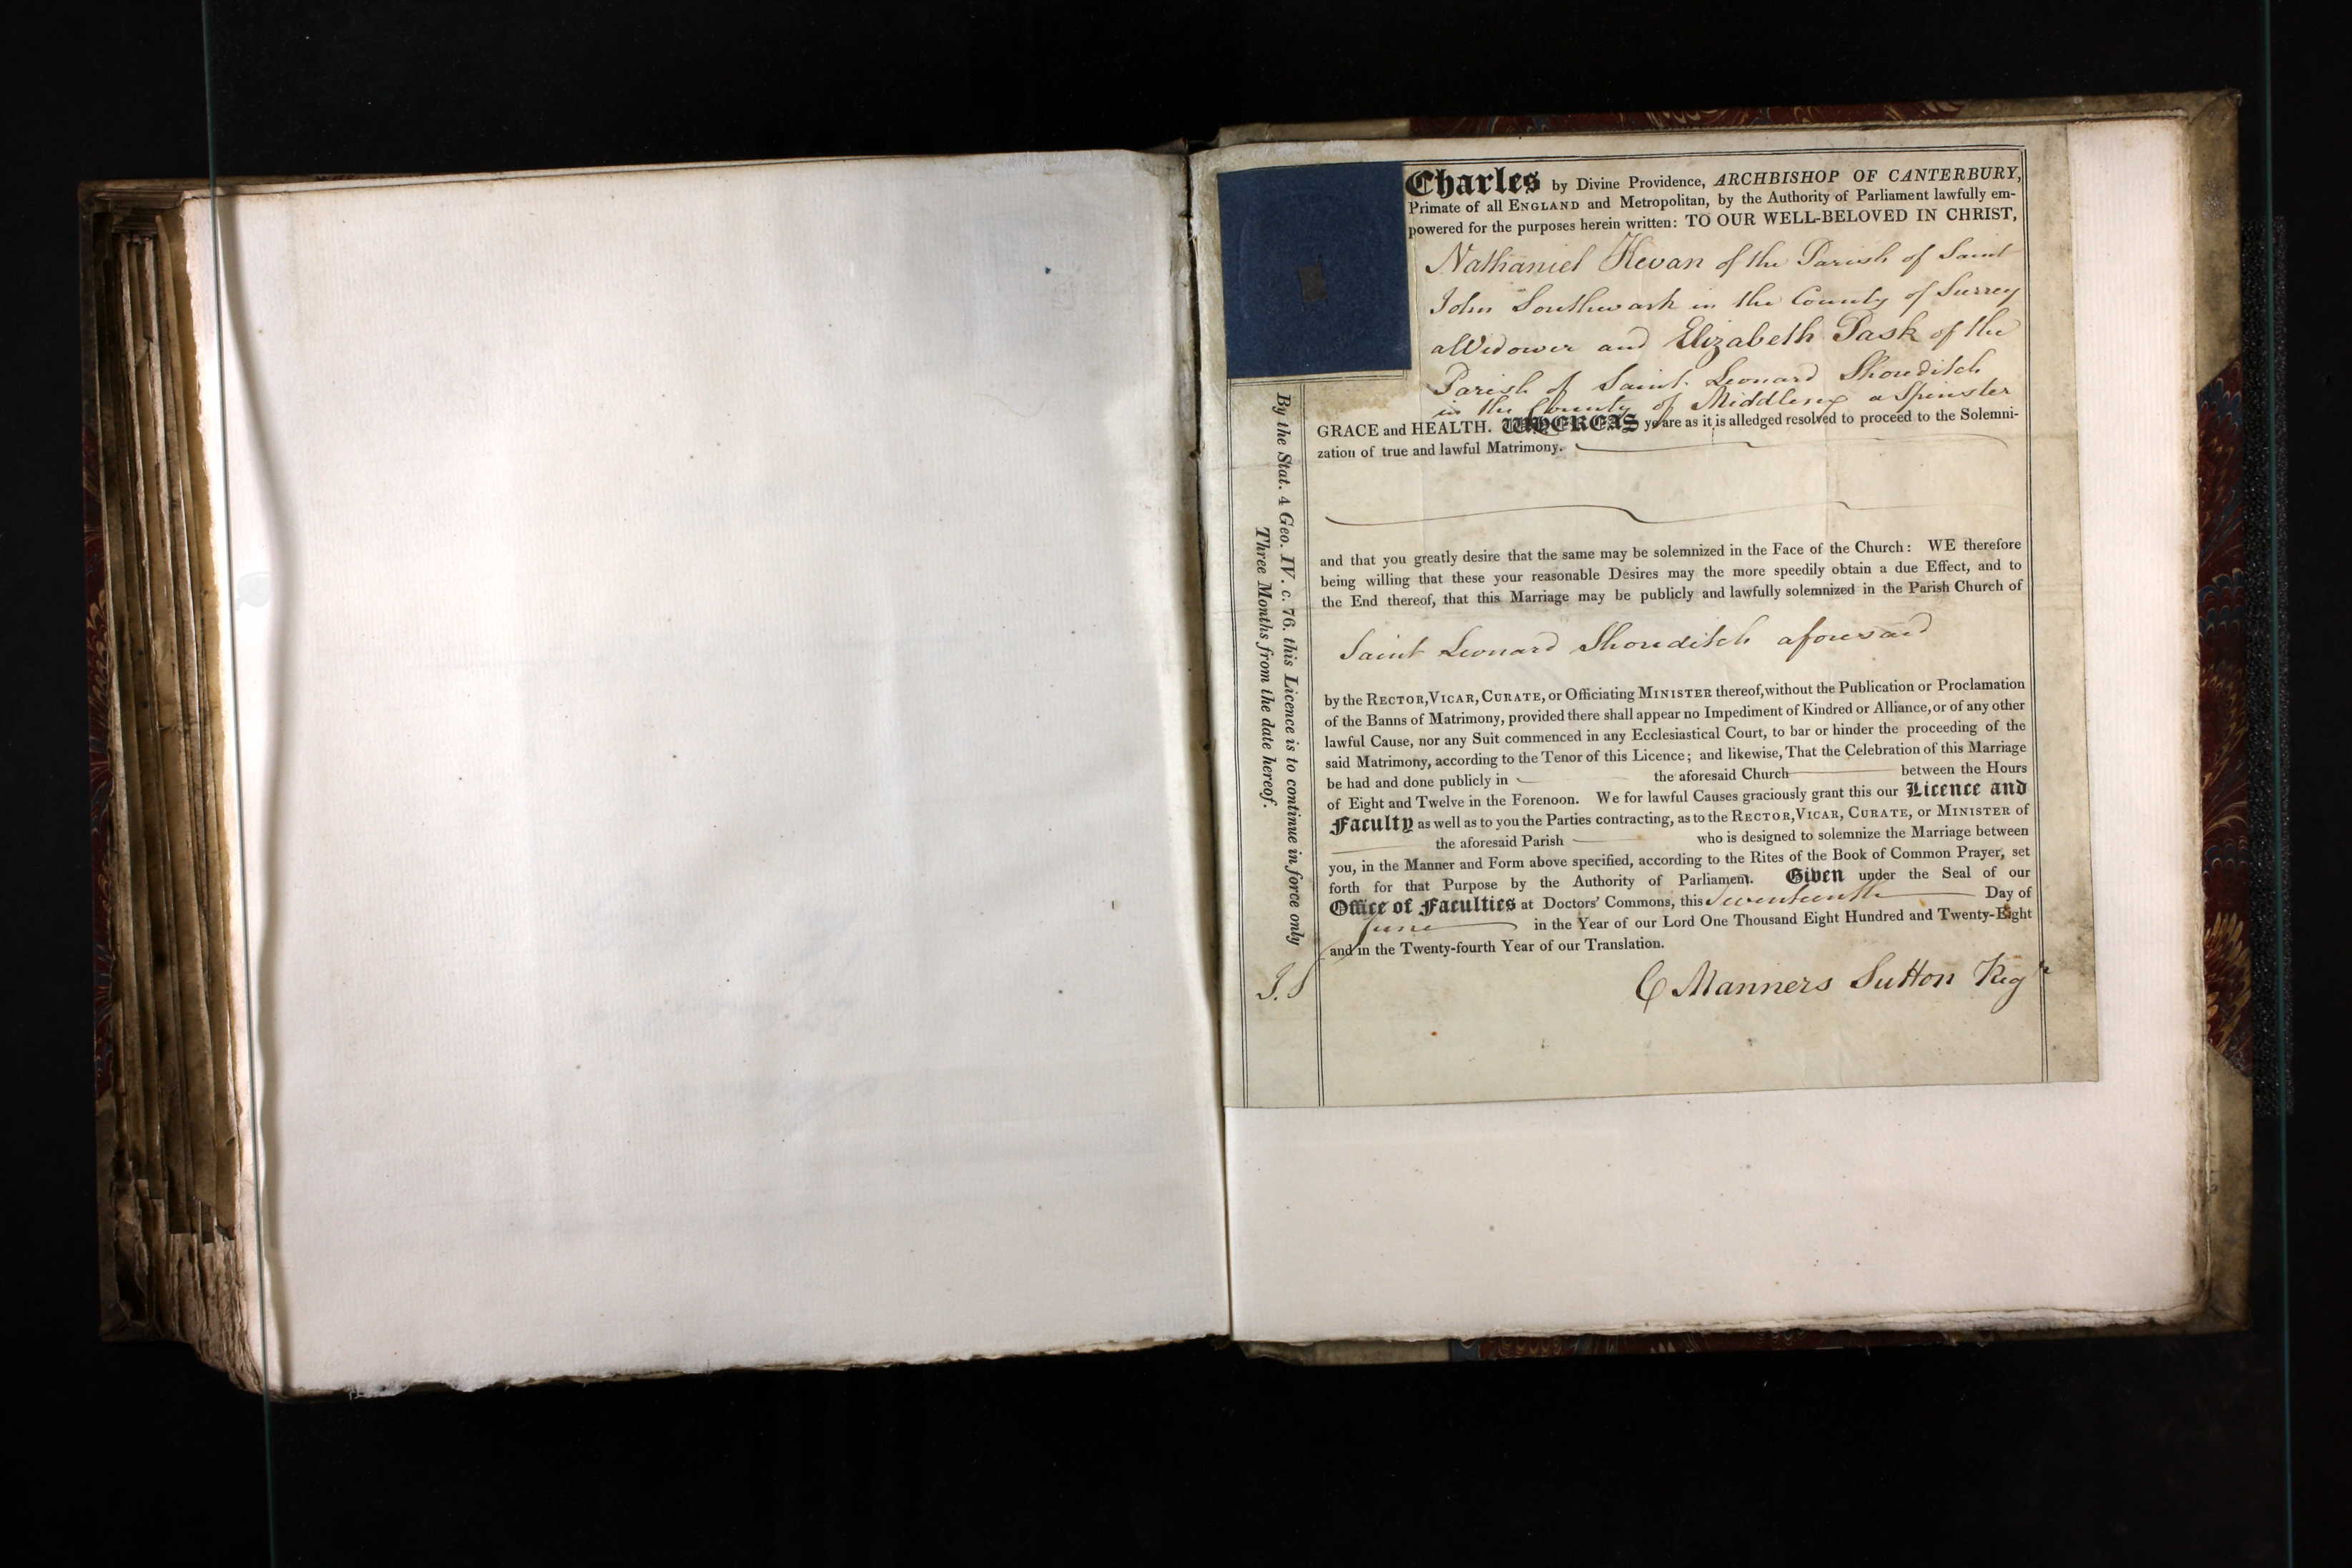 Licence granted for the marriage of Nathaniel Kevan to Elizabeth Pask in 1828